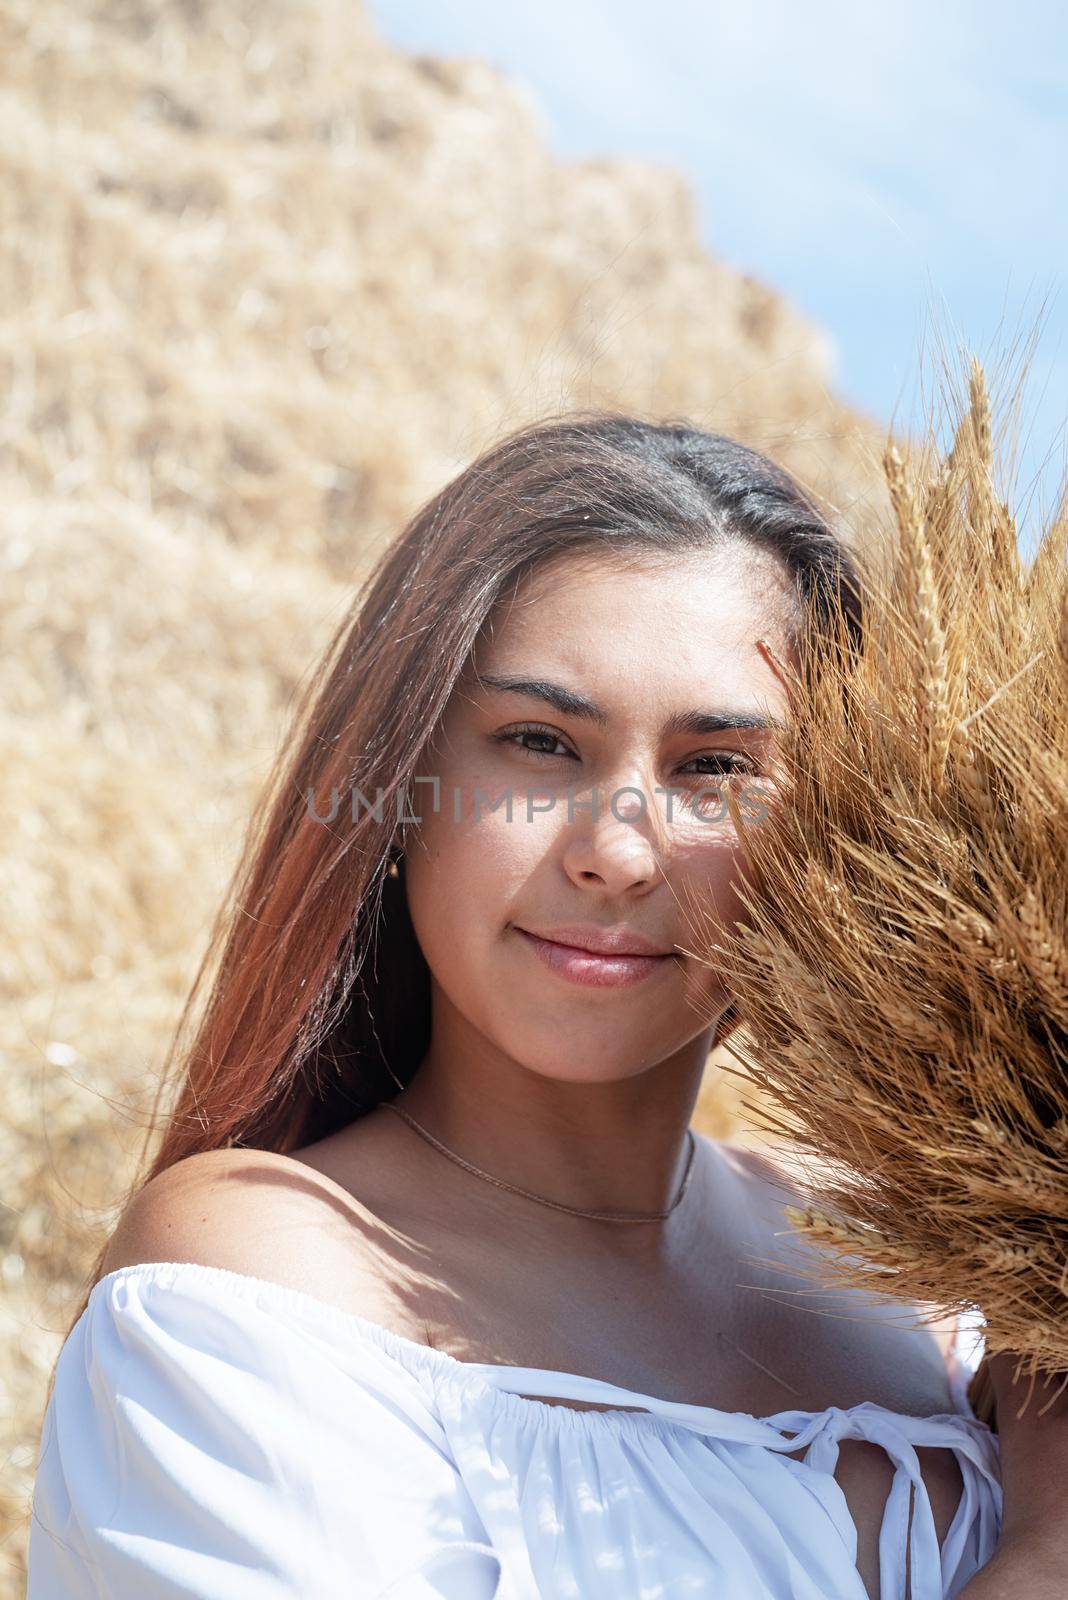 Picnic in countryside. Young woman sitting on haystack in harvested field holding wheat bouquet